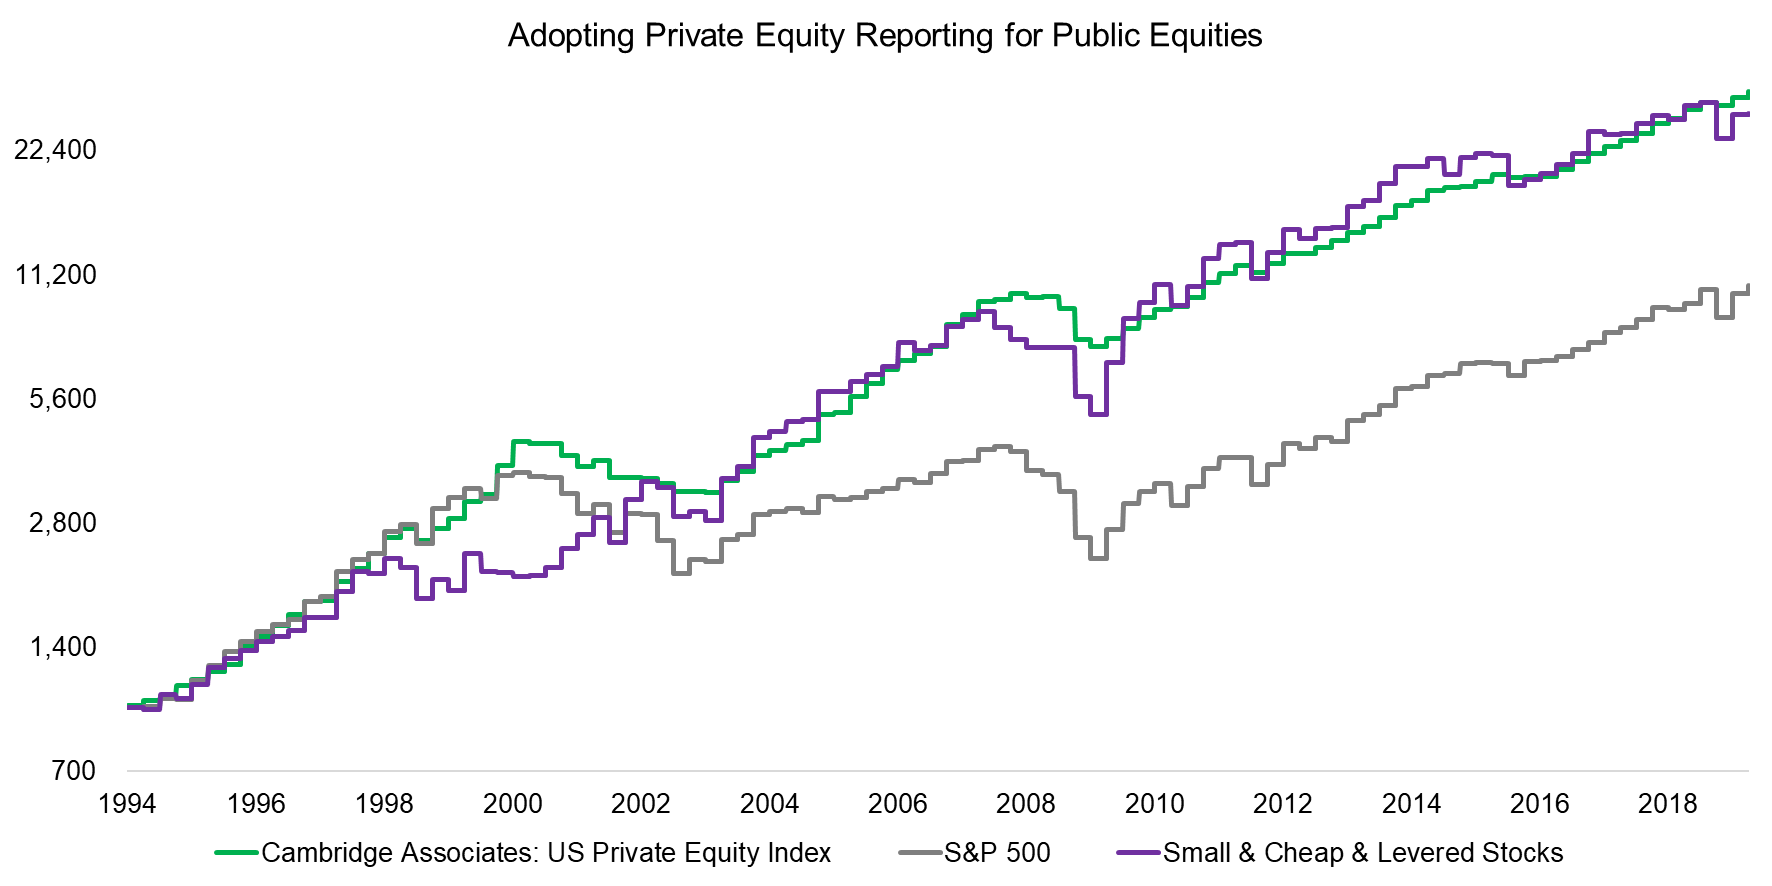 Adopting Private Equity Reporting for Public Equities